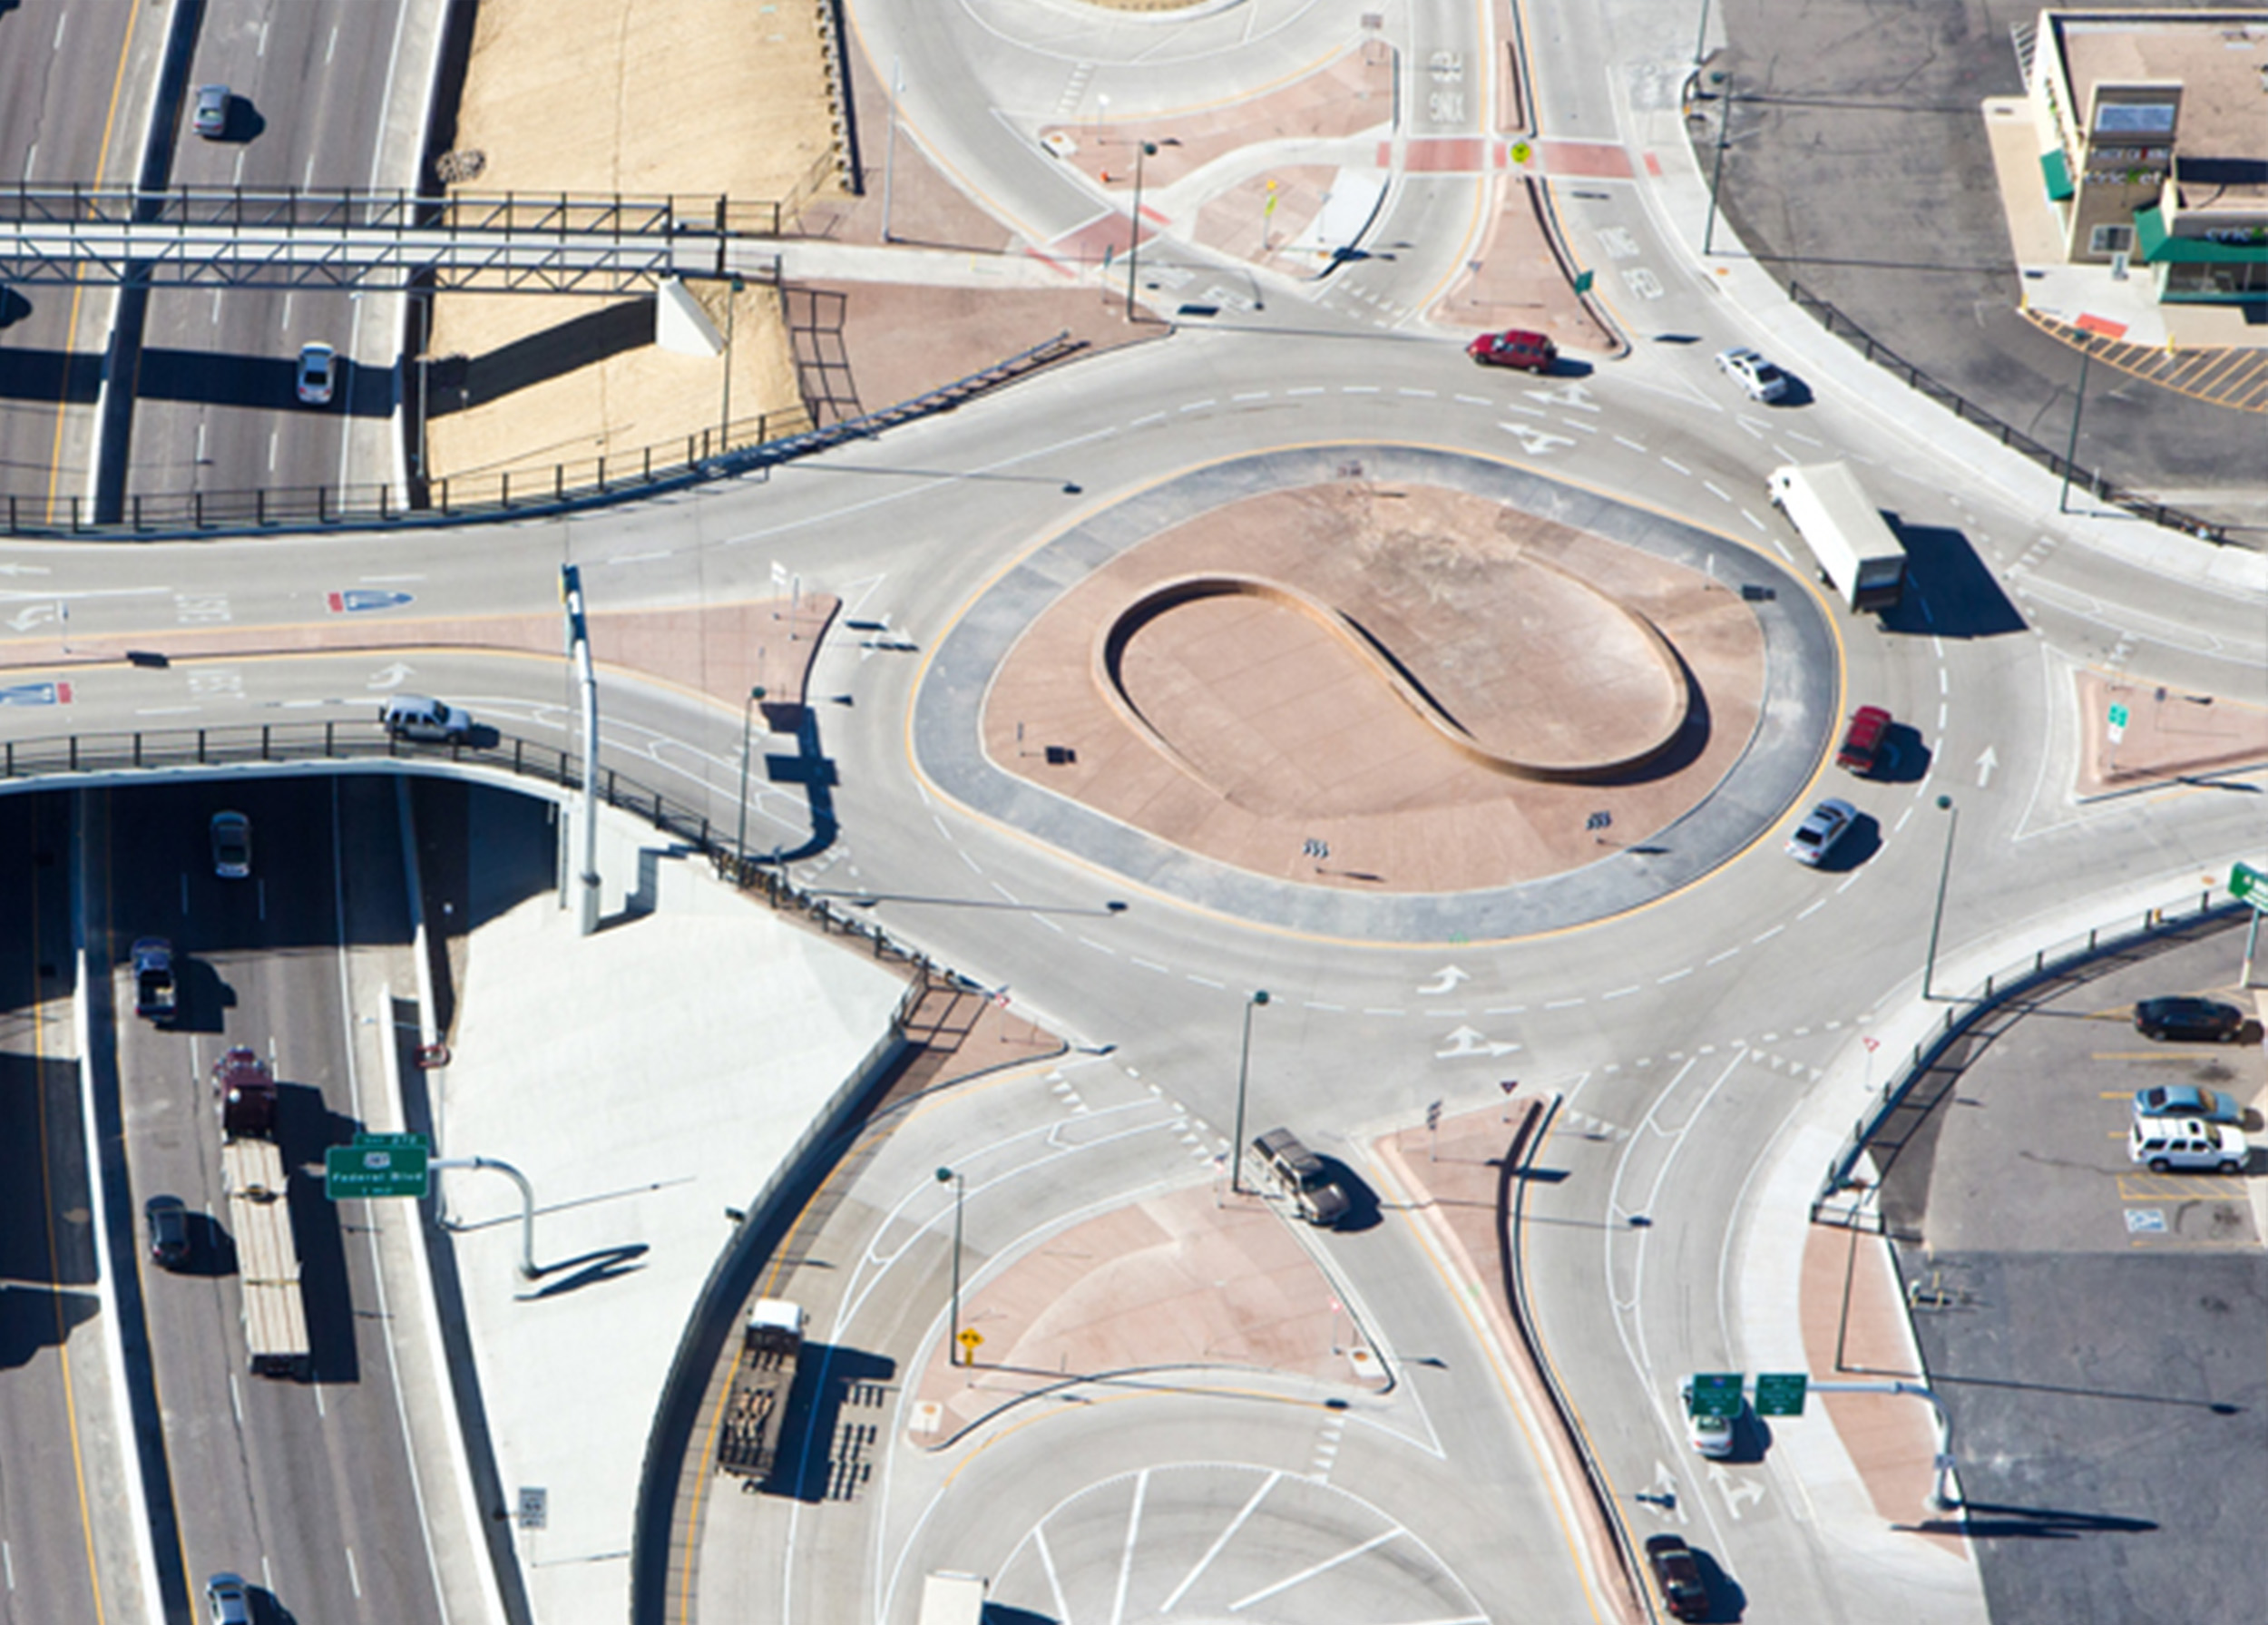 This project reconstructed the Pecos Street Bridge over I-70 and the interchange into modern roundabouts at the ramp intersections with Pecos Street.